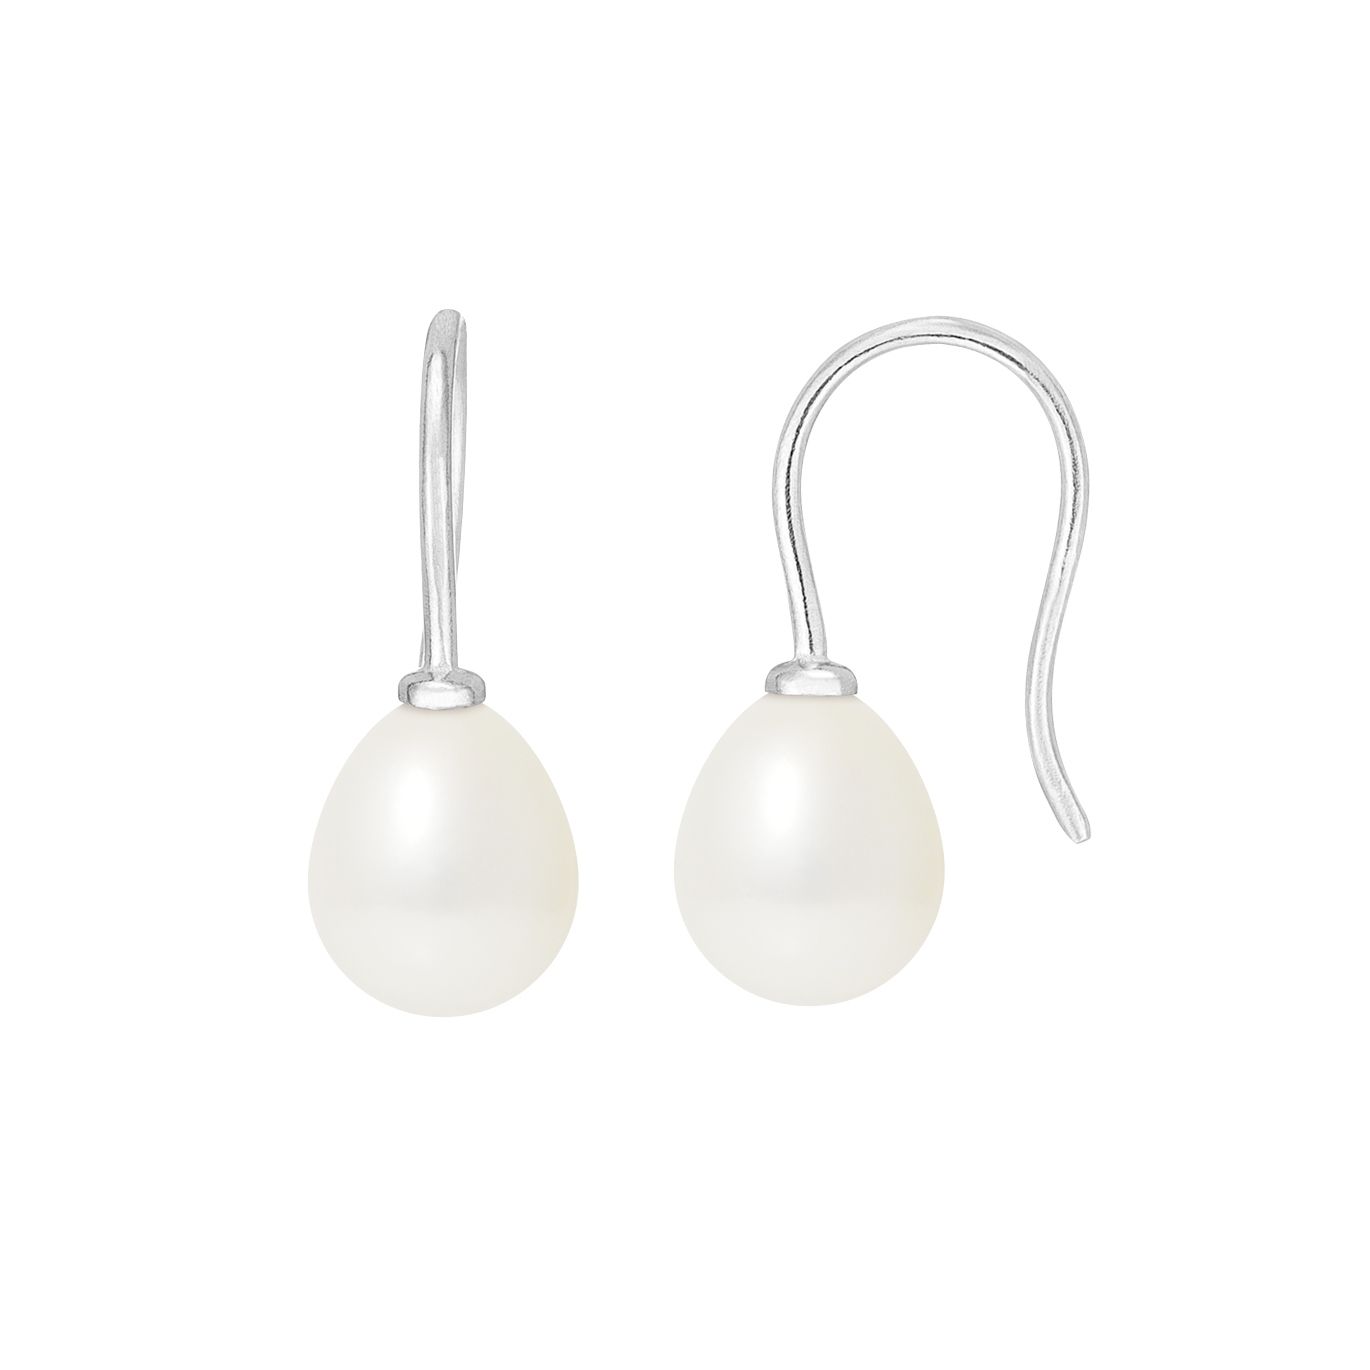 White Freshwater Pearls Earrings and 925 Silver